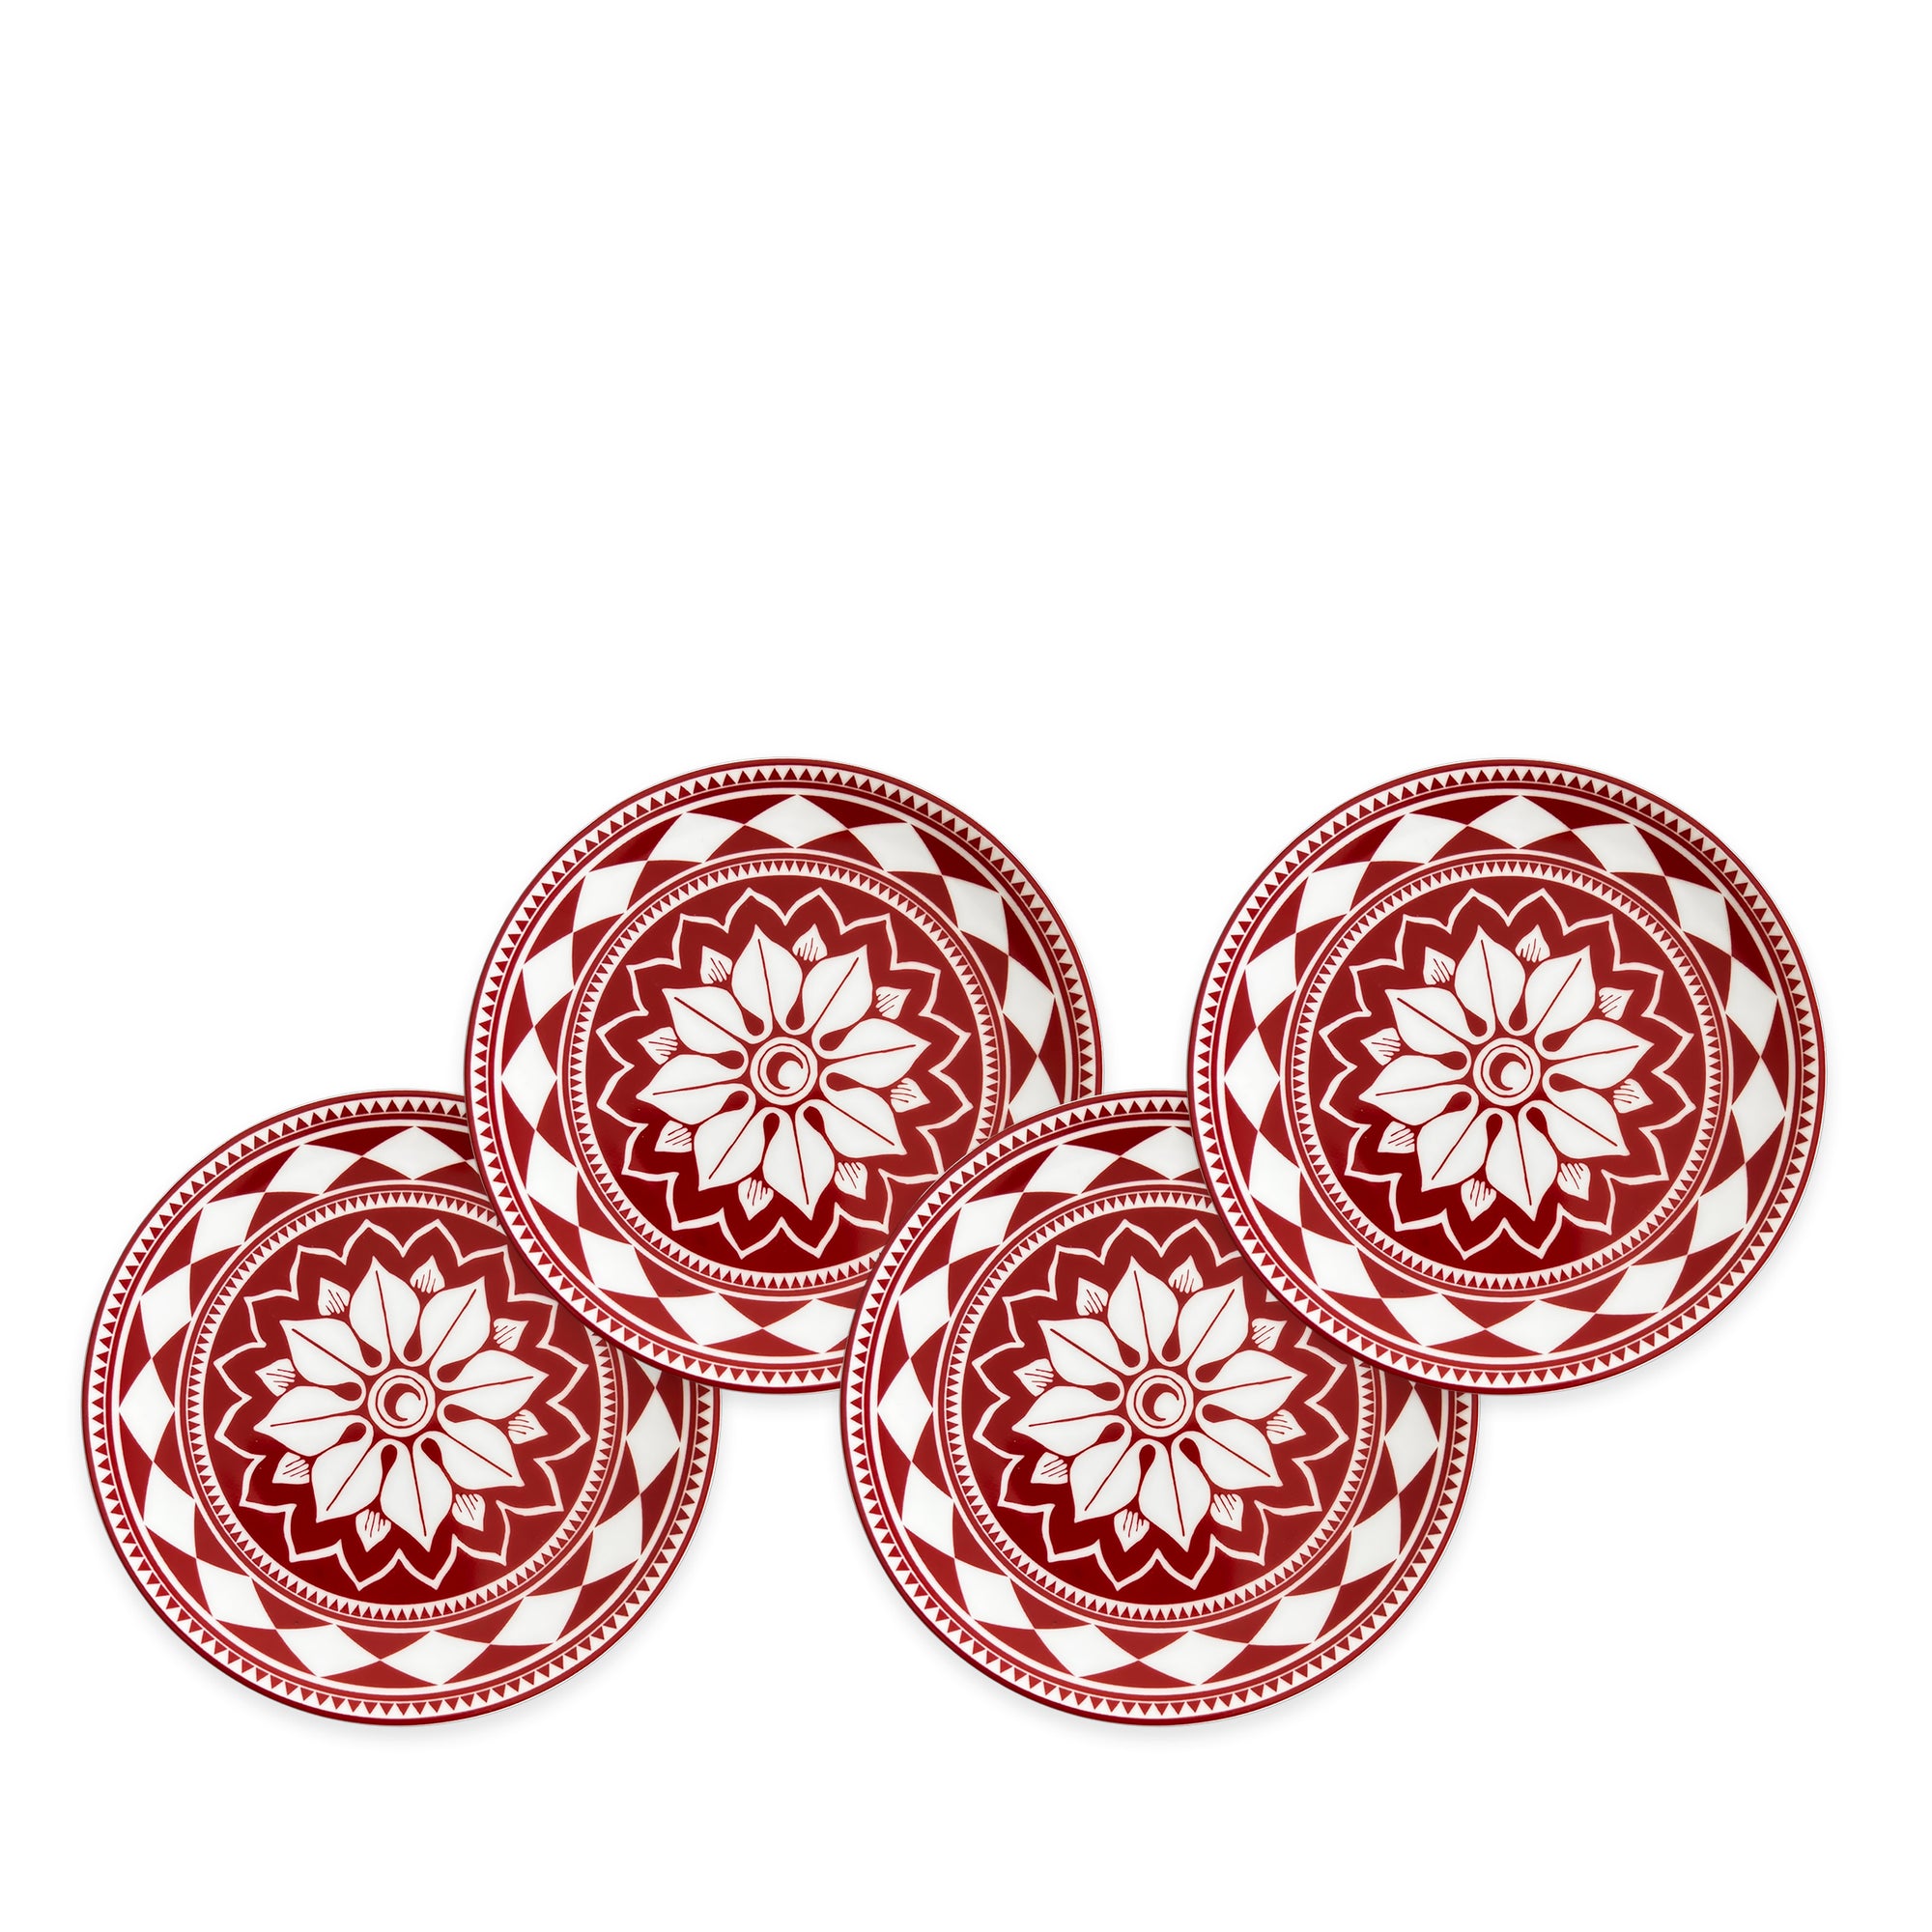 Four red and white ceramic plates with bold geometric floral designs are arranged in a slightly overlapping line against a white background, showcasing Fez Crimson Small Plates by Caskata Artisanal Home—heirloom-quality dinnerware perfect for any entertaining powerhouse.